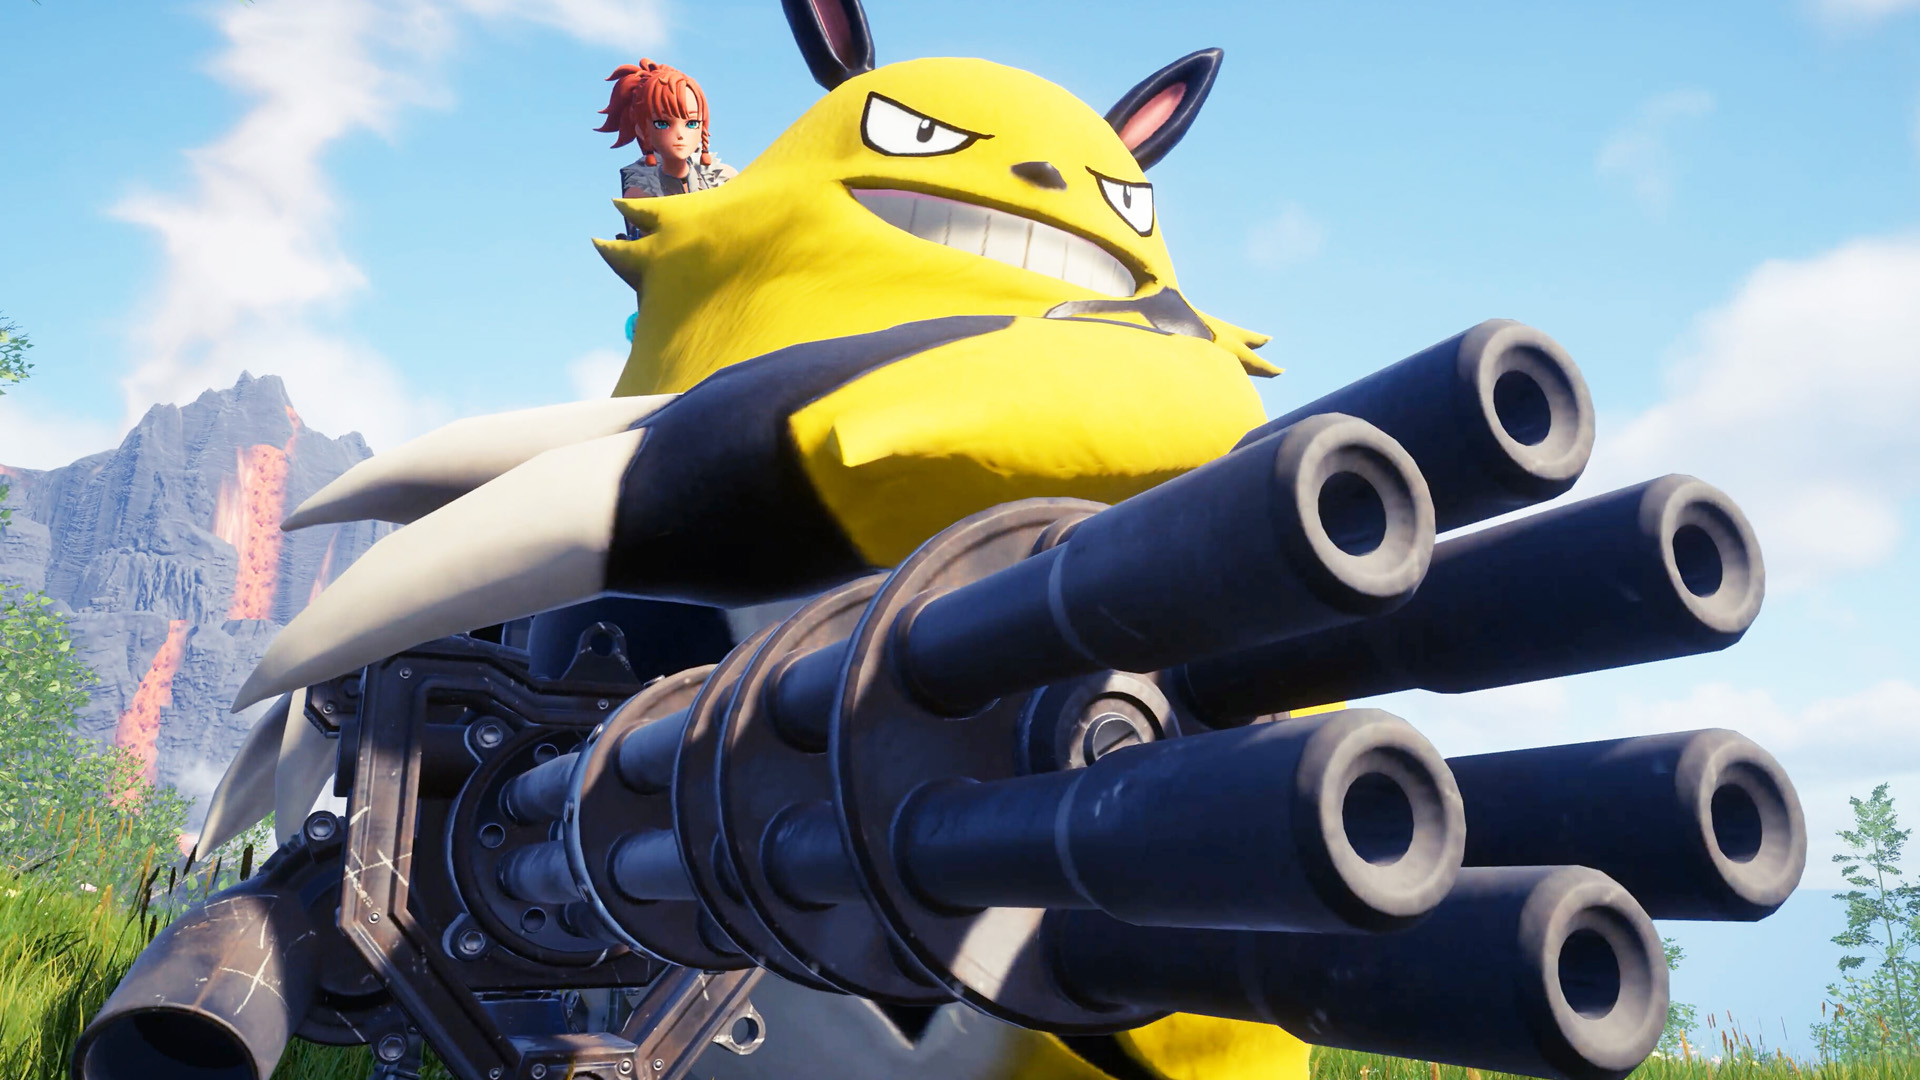 Pokémon with guns blasts into Steam Early Access next week